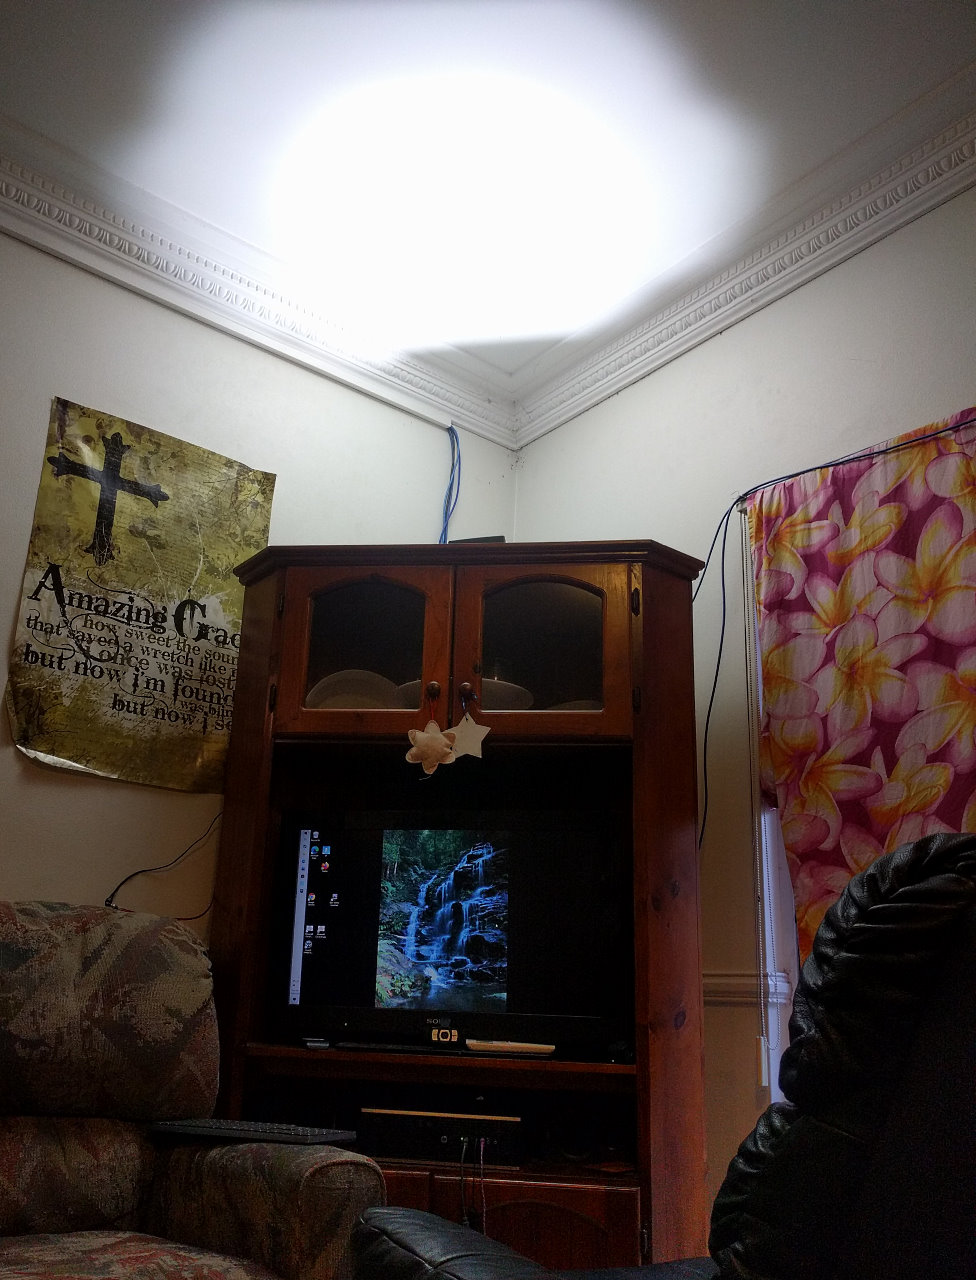 The floodlight is pointed at the ceiling, so the light difuses around the room.